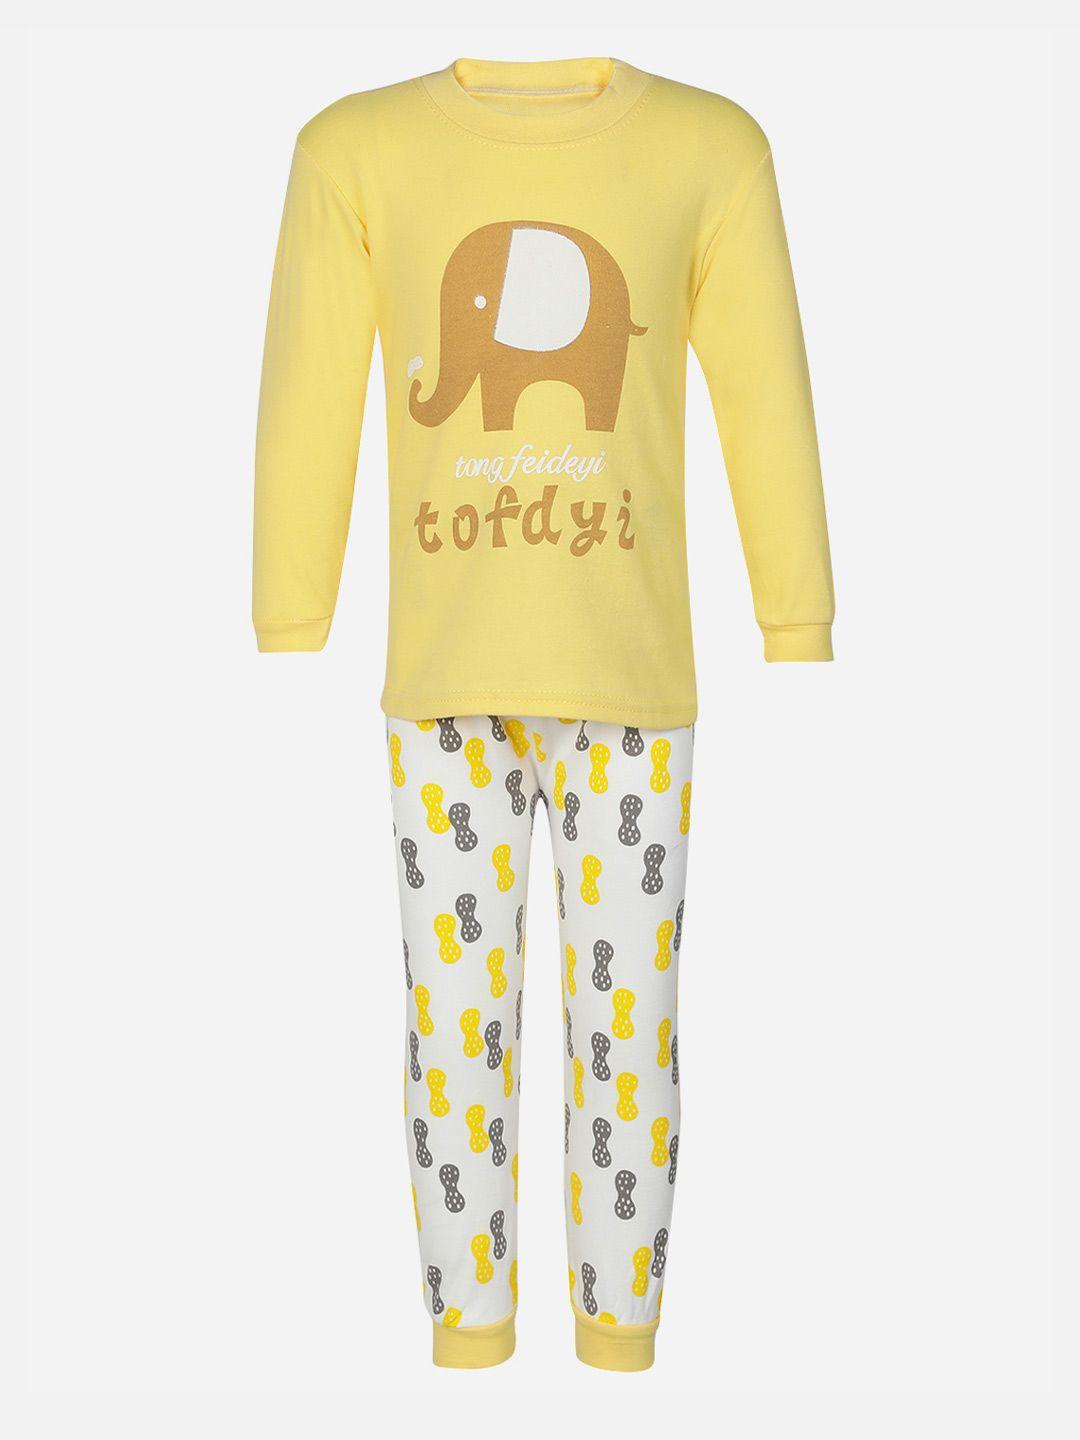 passion petals unisex kids yellow & white printed night suit